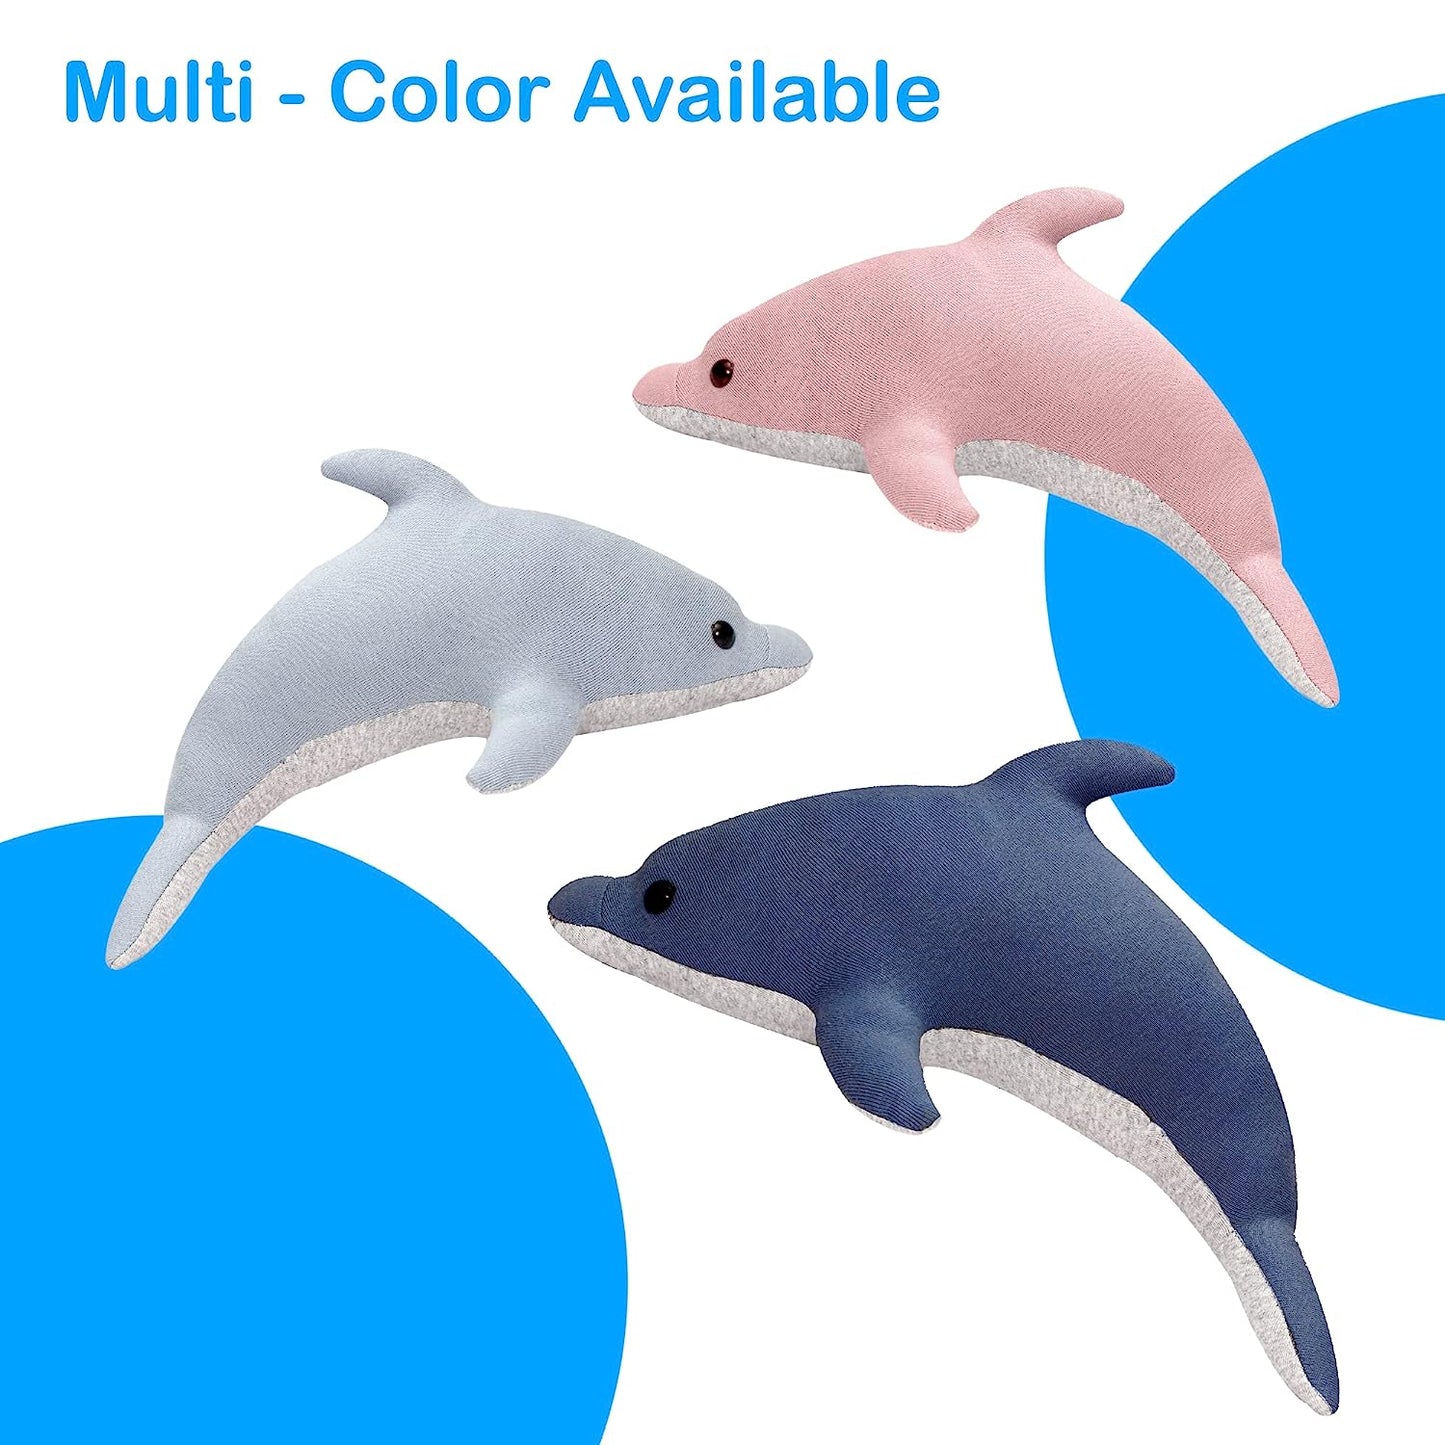 Dolphin Stuffed Animals Soft Toy with Cute Black Eyes for Kids (Pink)